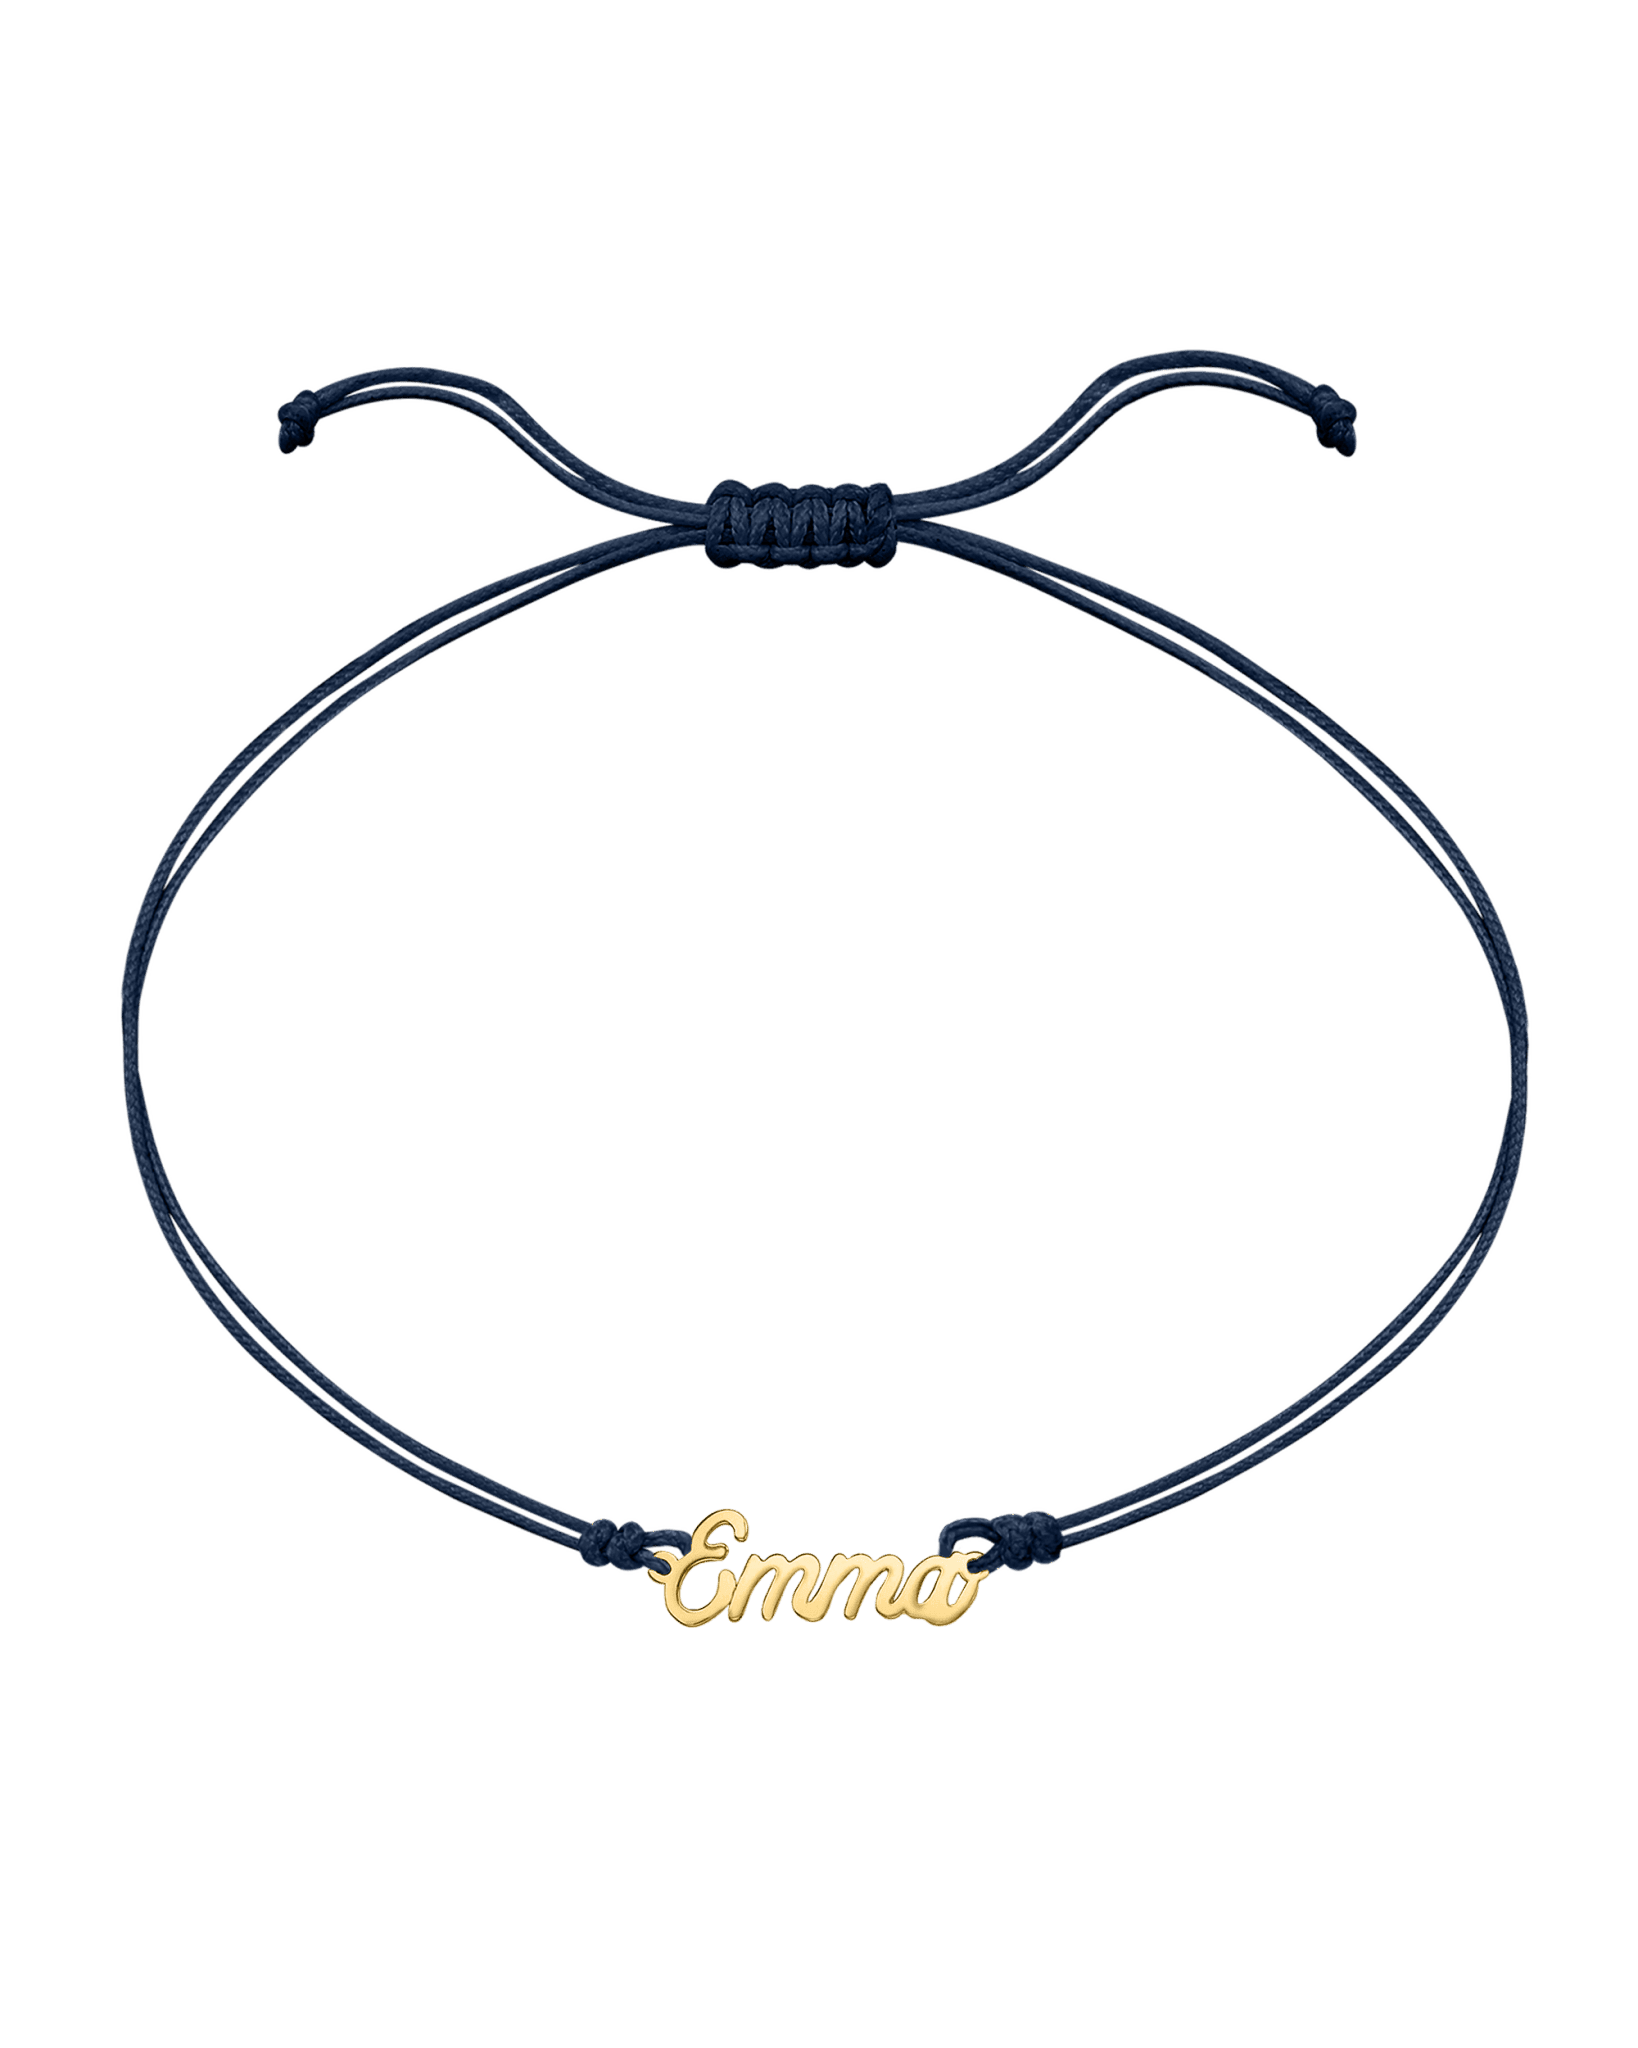 Name Plate String of Love - 14K Yellow Gold Bracelets 14K Solid Gold Navy Blue 1 